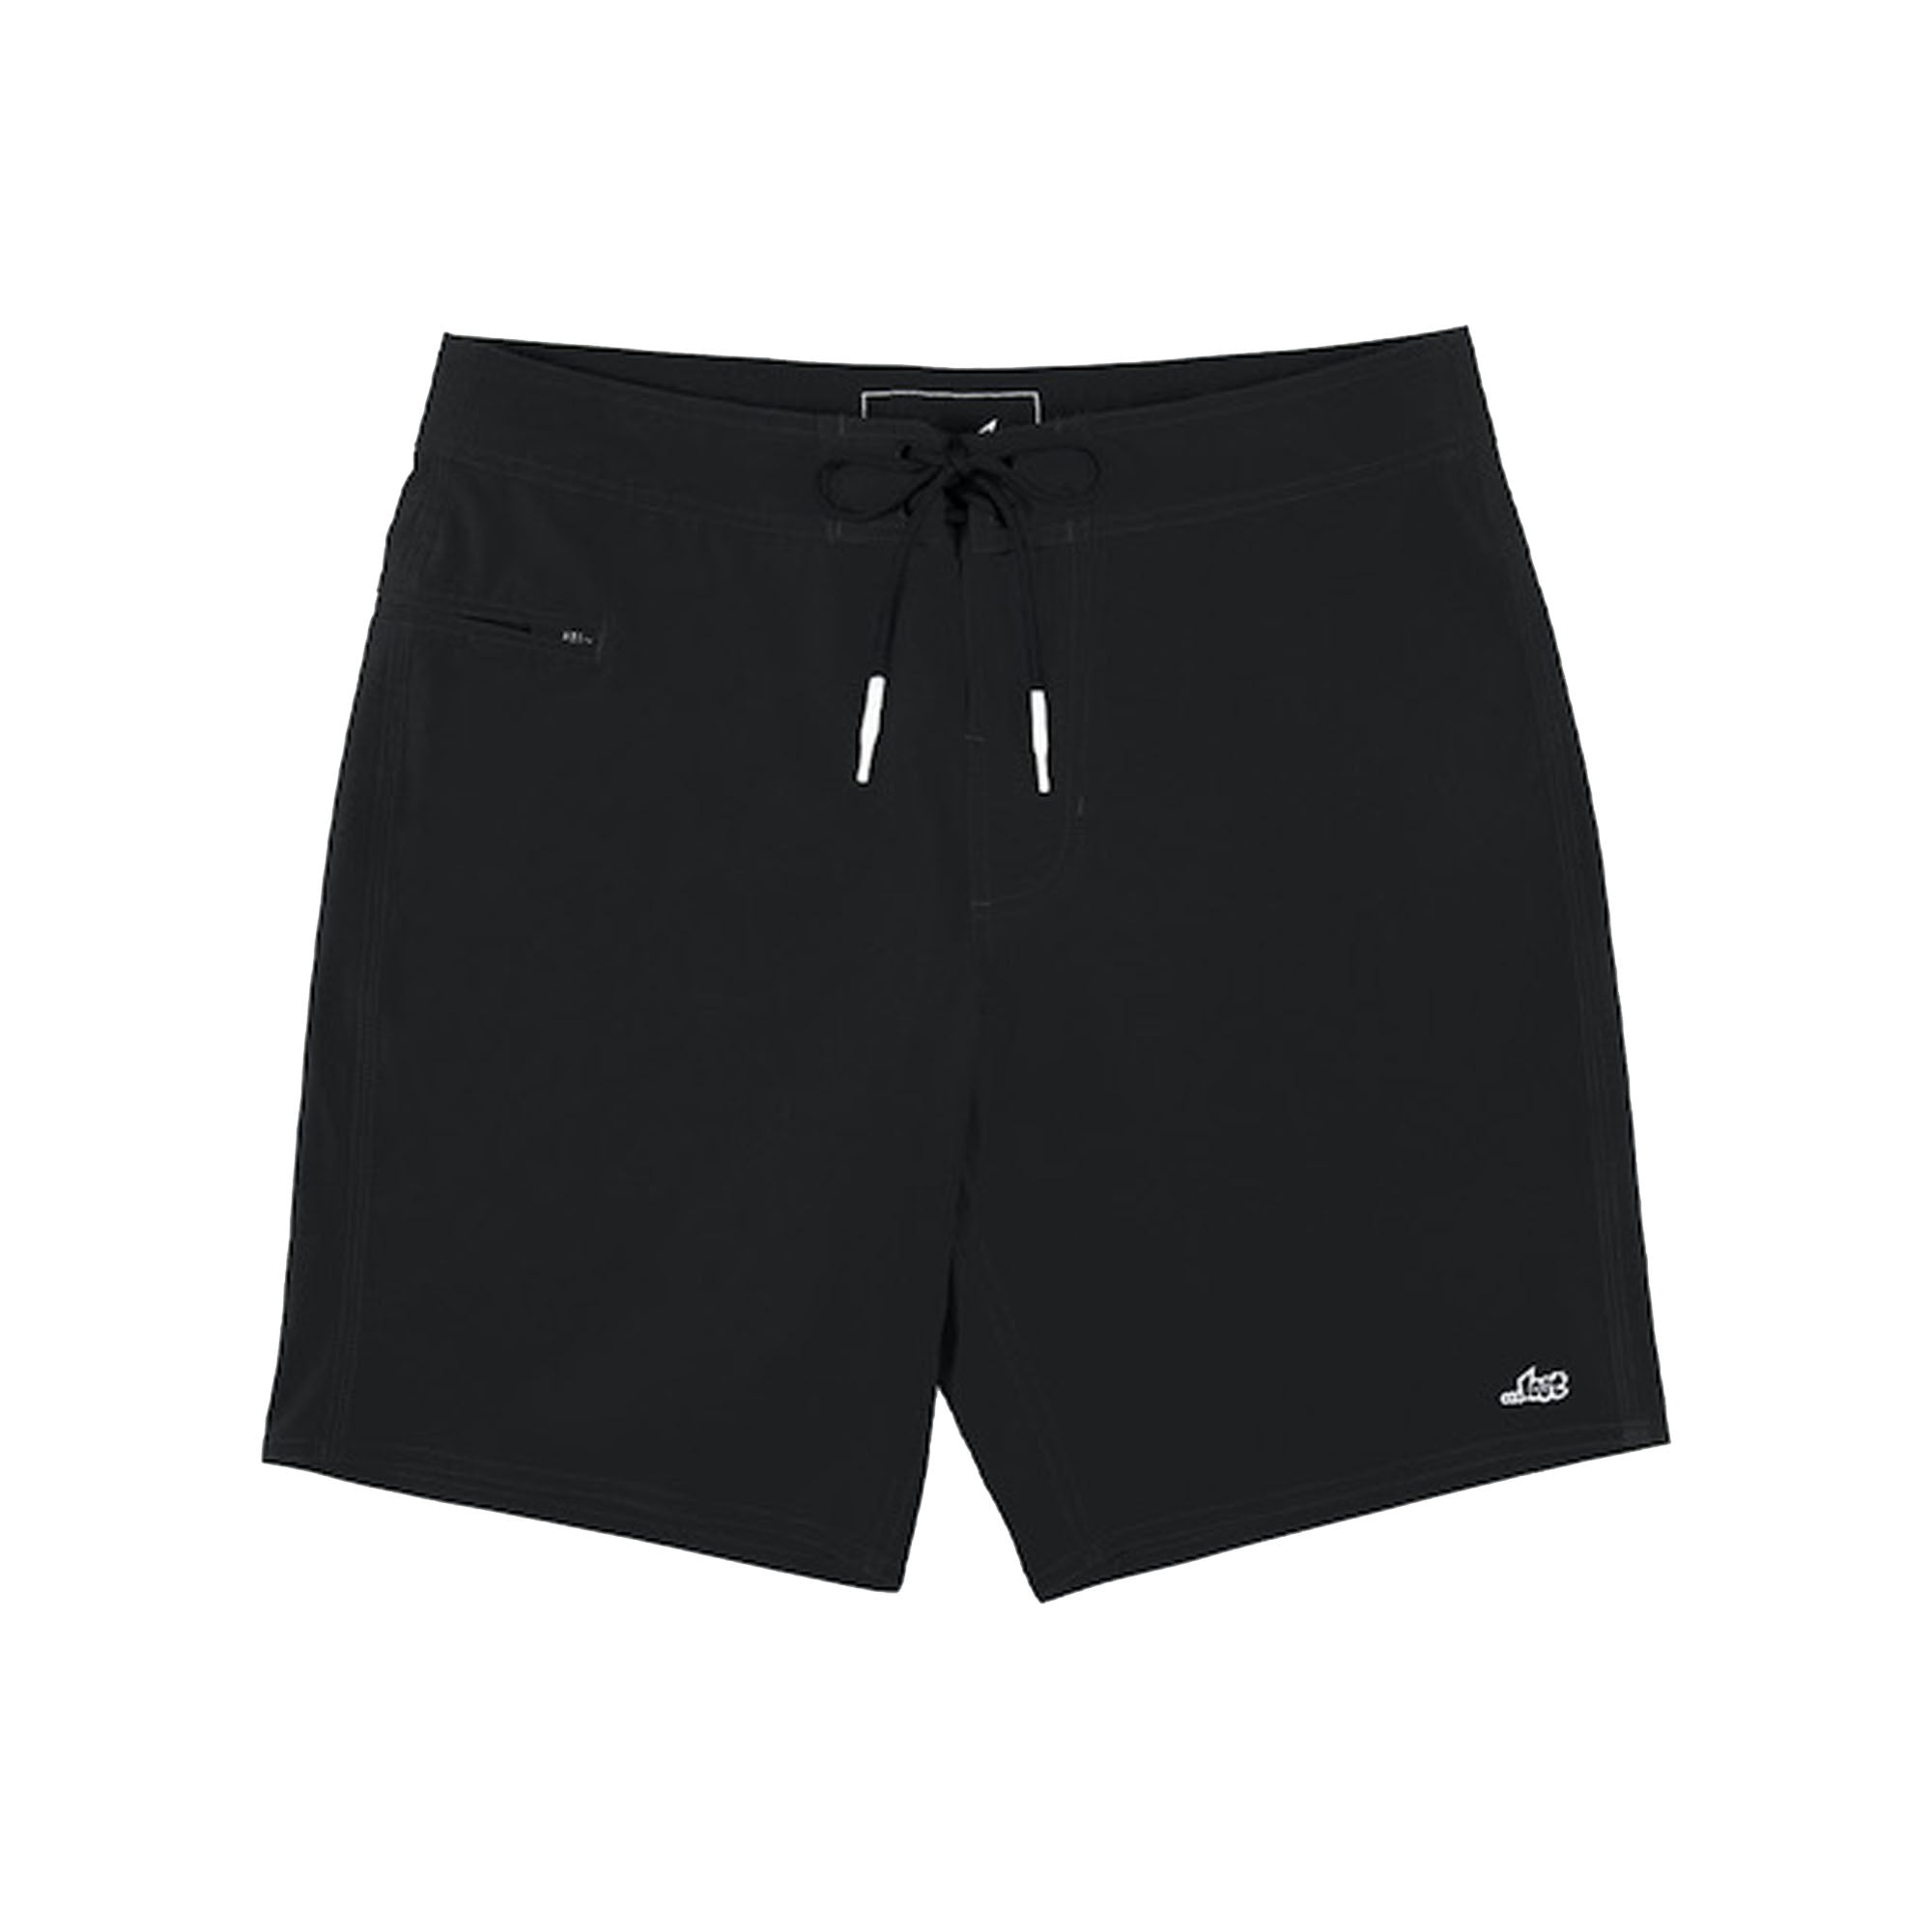 Lost Sessions 18" Men's Boardshorts